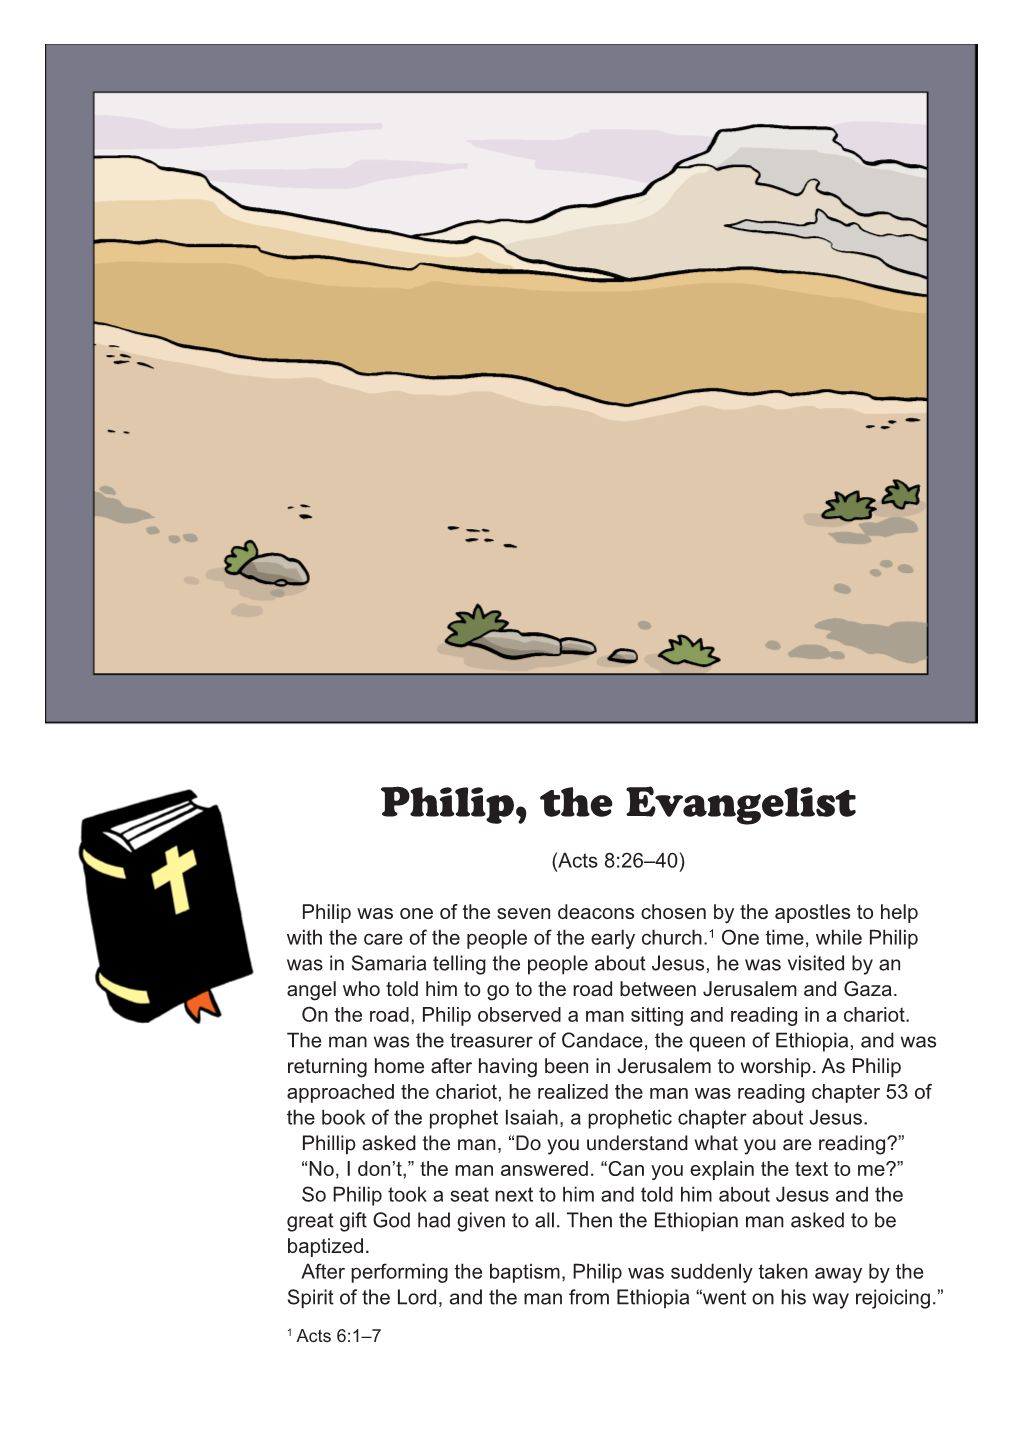 The Acts of the Apostles: Philip, the Evangelist